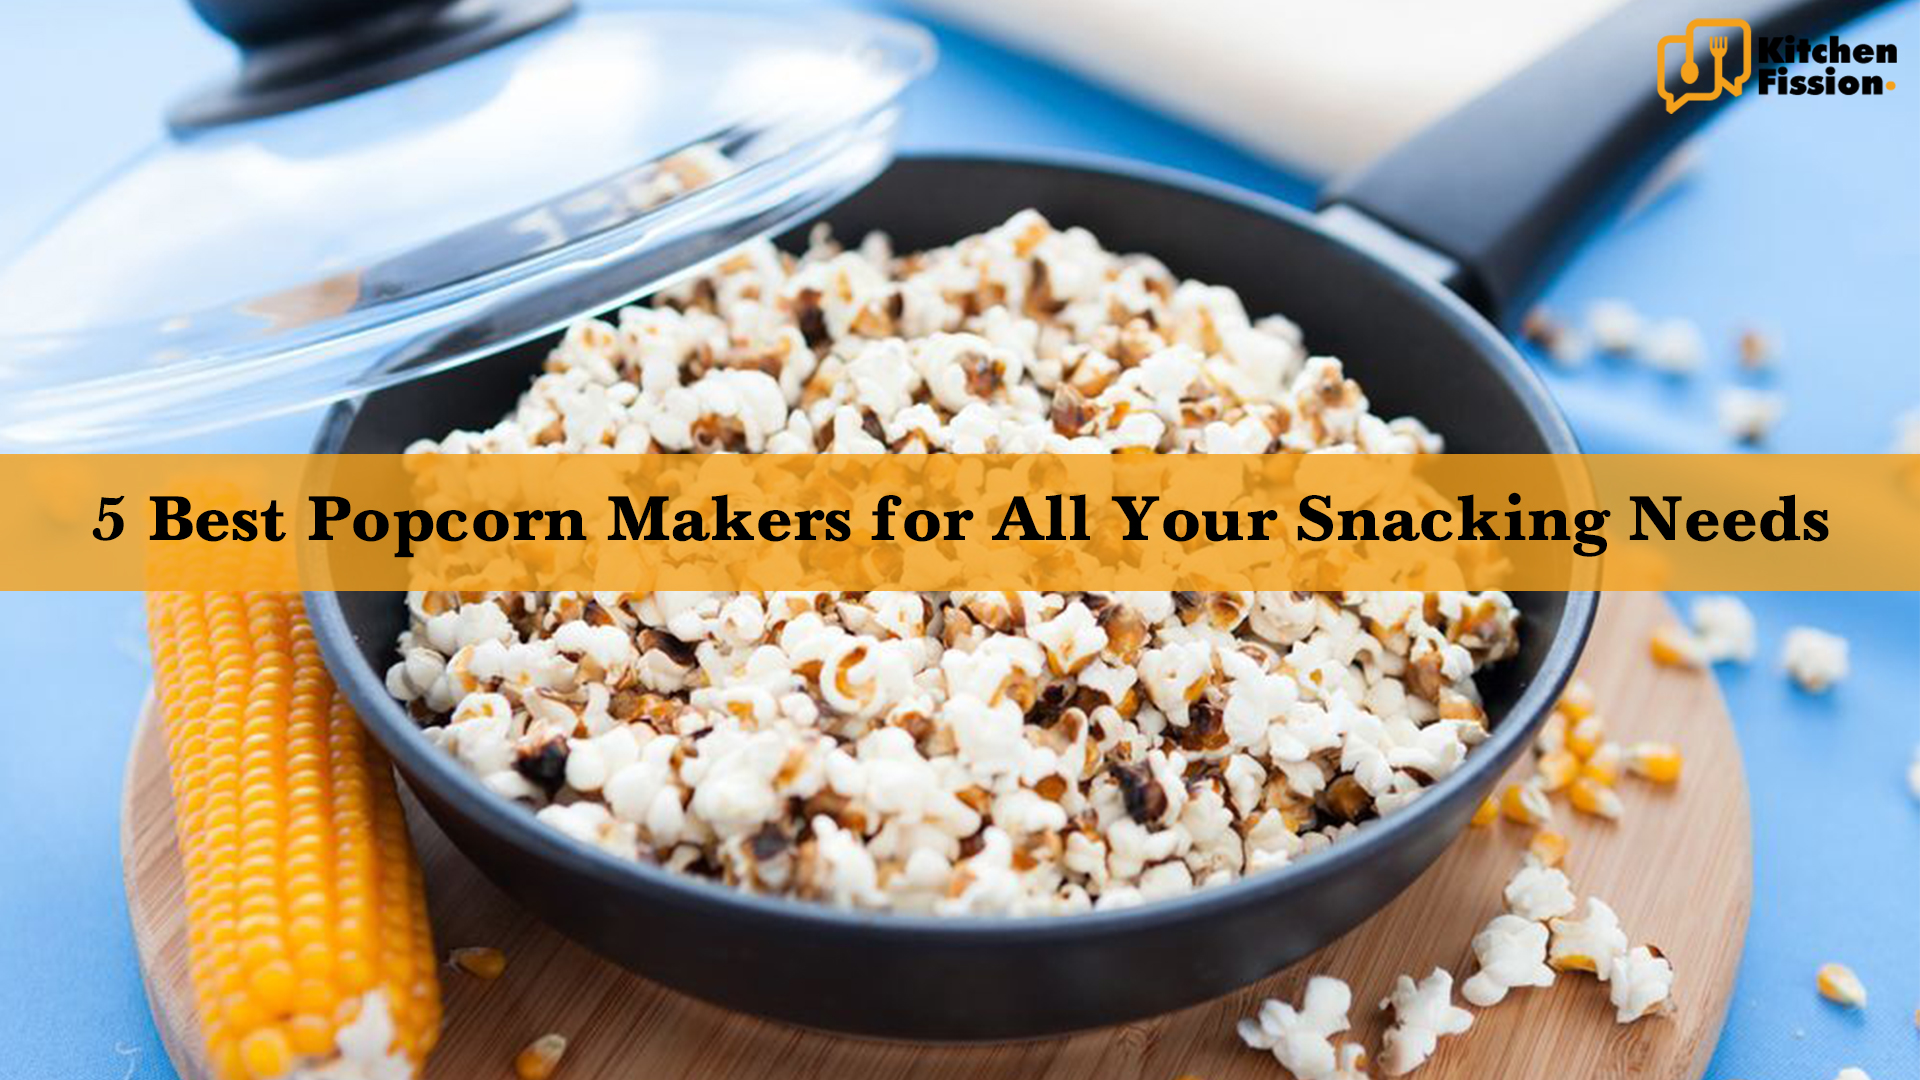 Best Popcorn Makers for All Your Snacking Needs